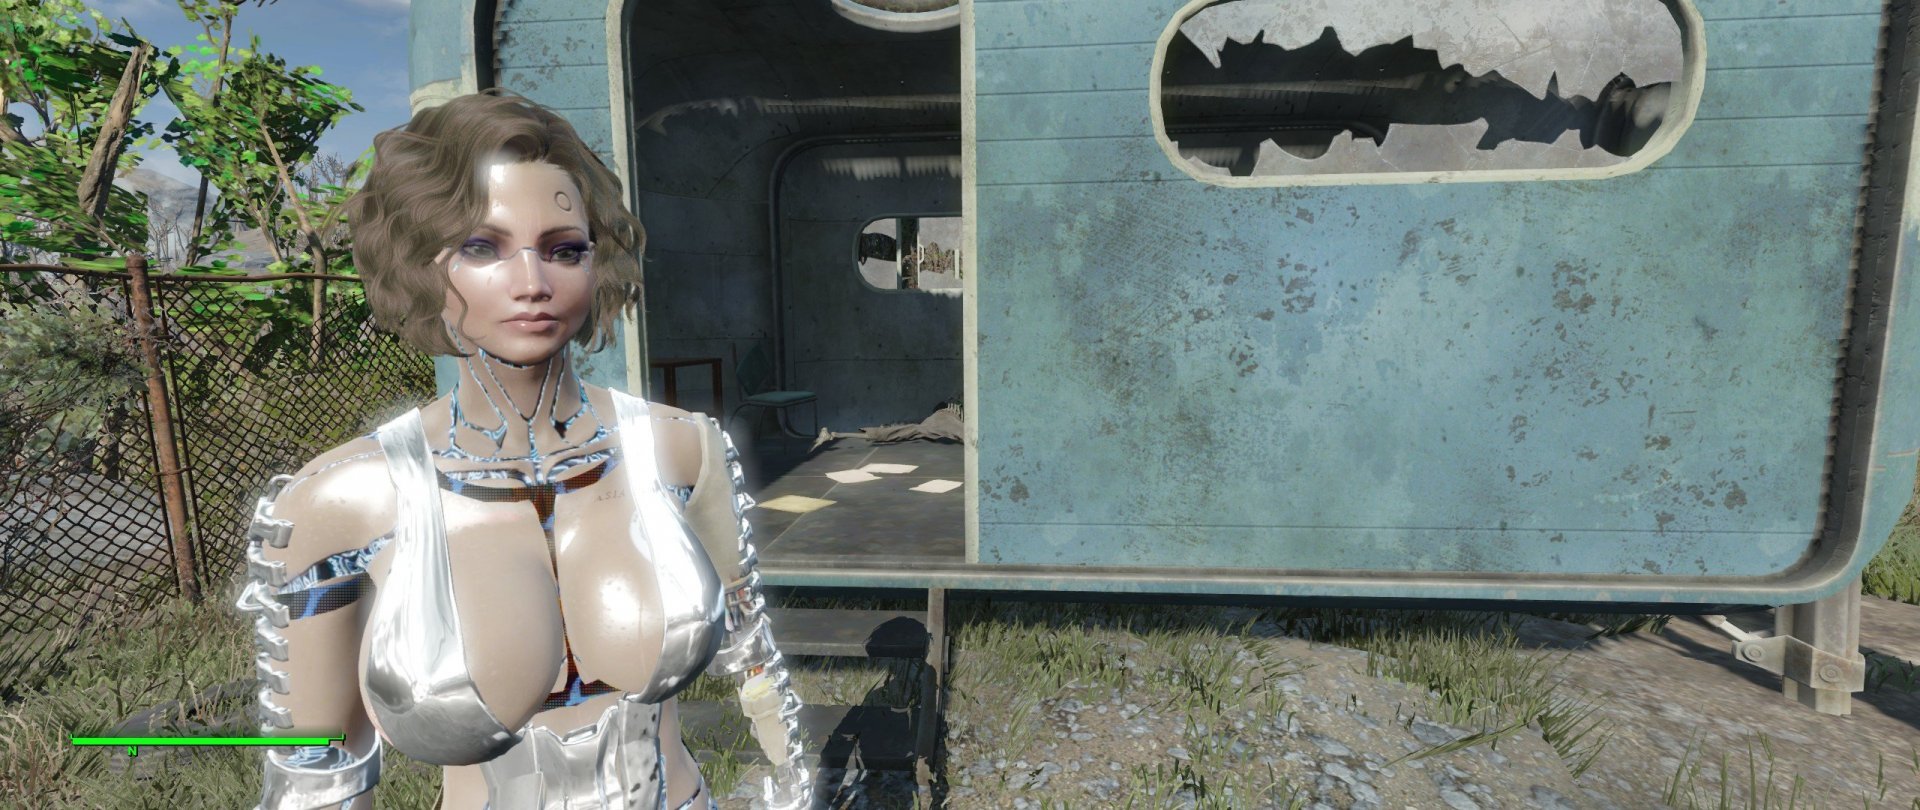 Fallout 4 hookers of the commonwealth lite фото 11